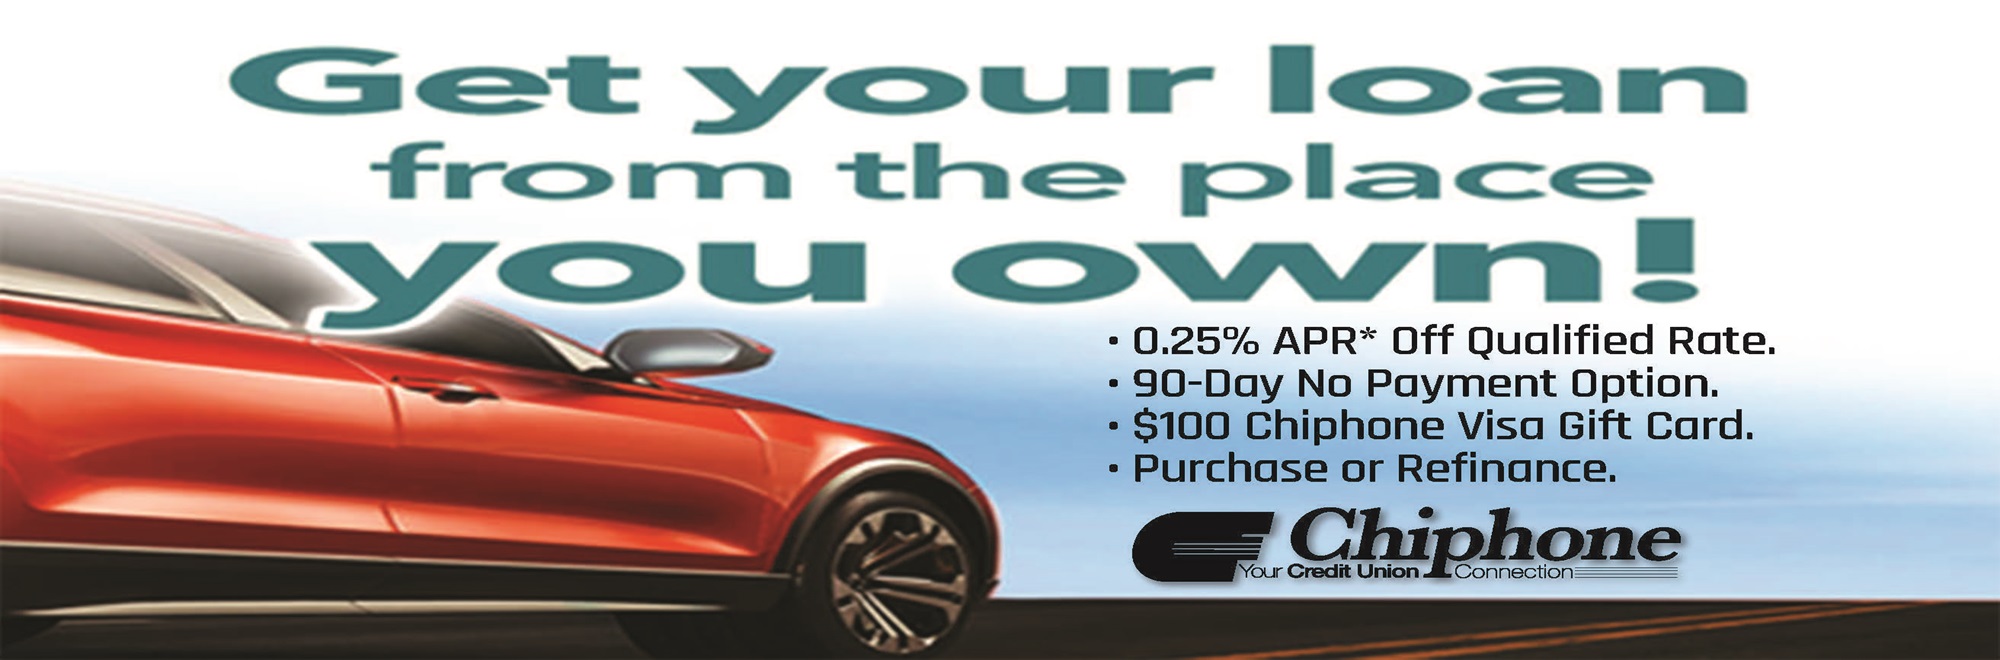 PURCHASE OR REFINANCE AUTO PROMOTION!